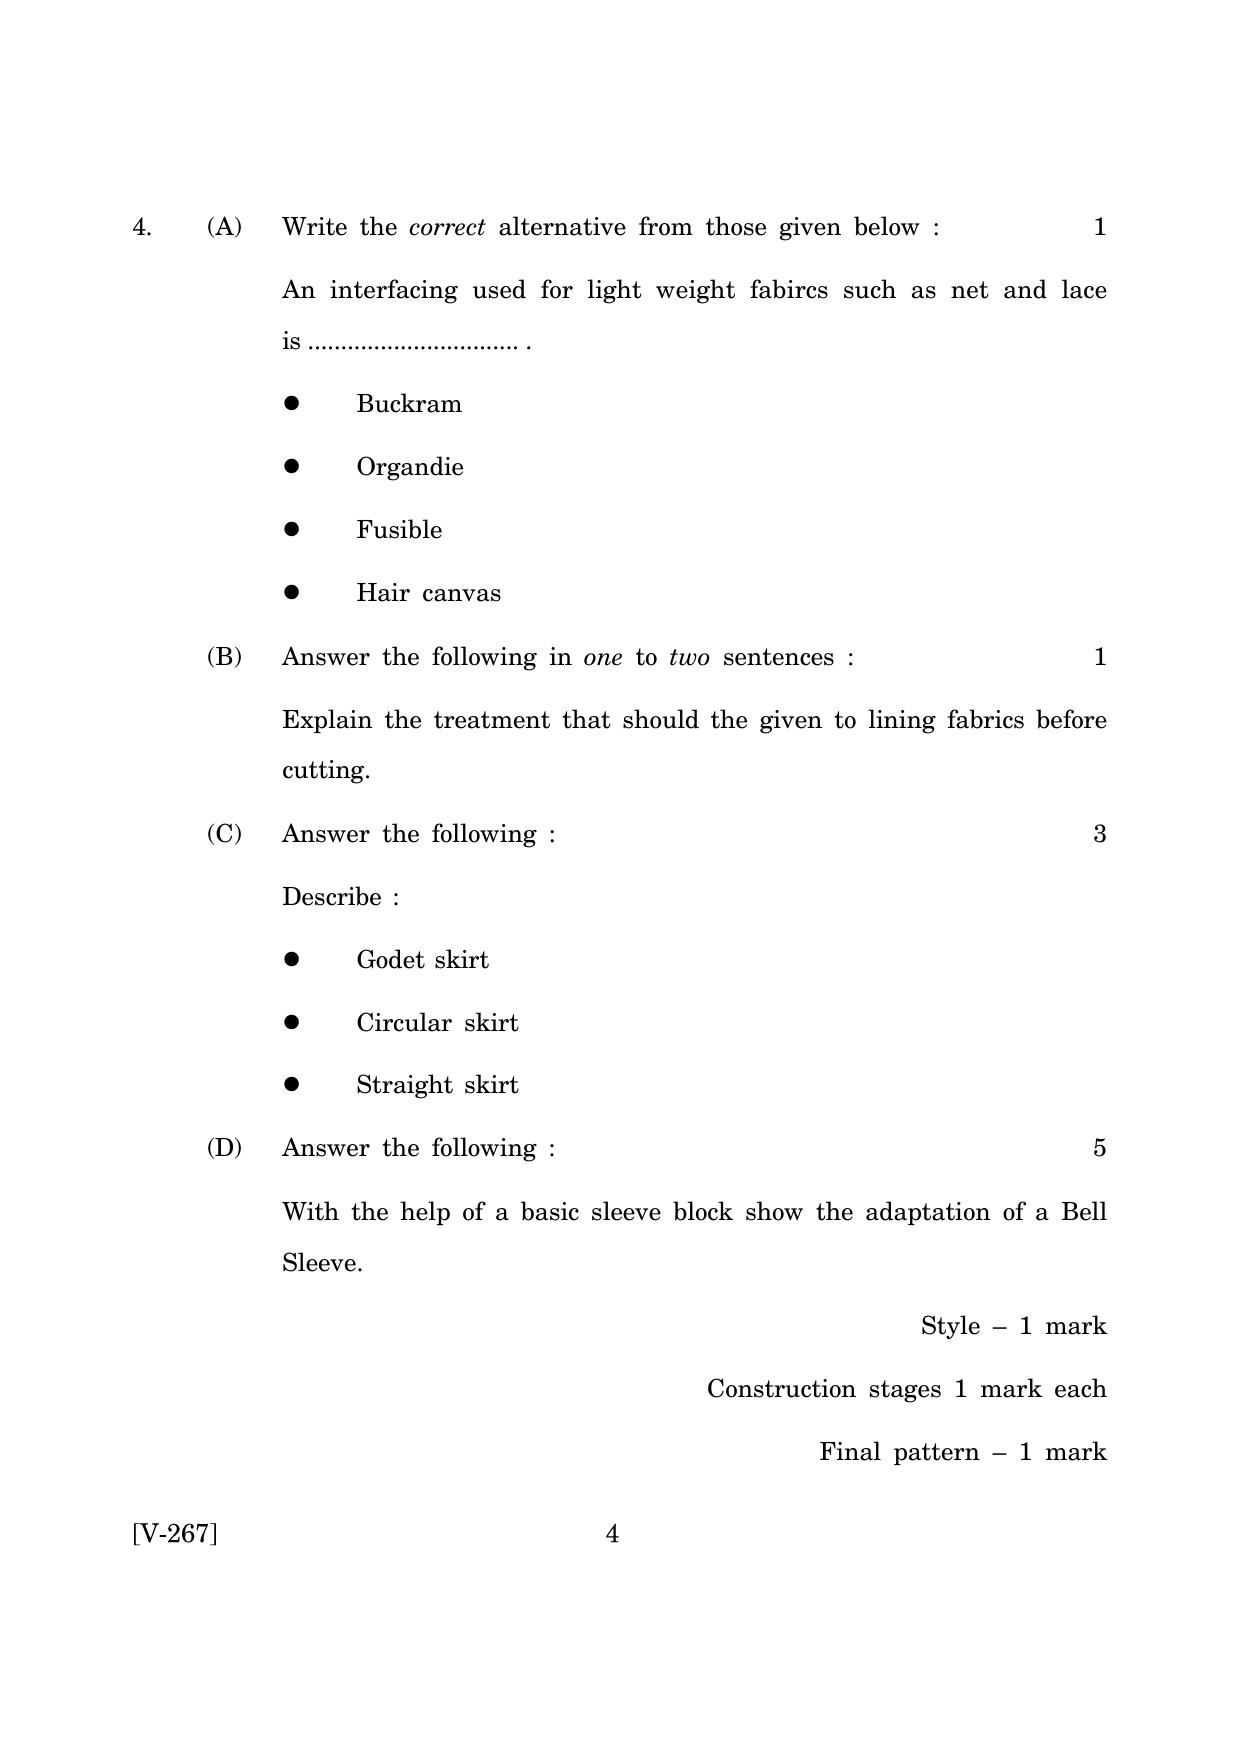 Goa Board Class 12 Clothing Construction   (March 2019) Question Paper - Page 4